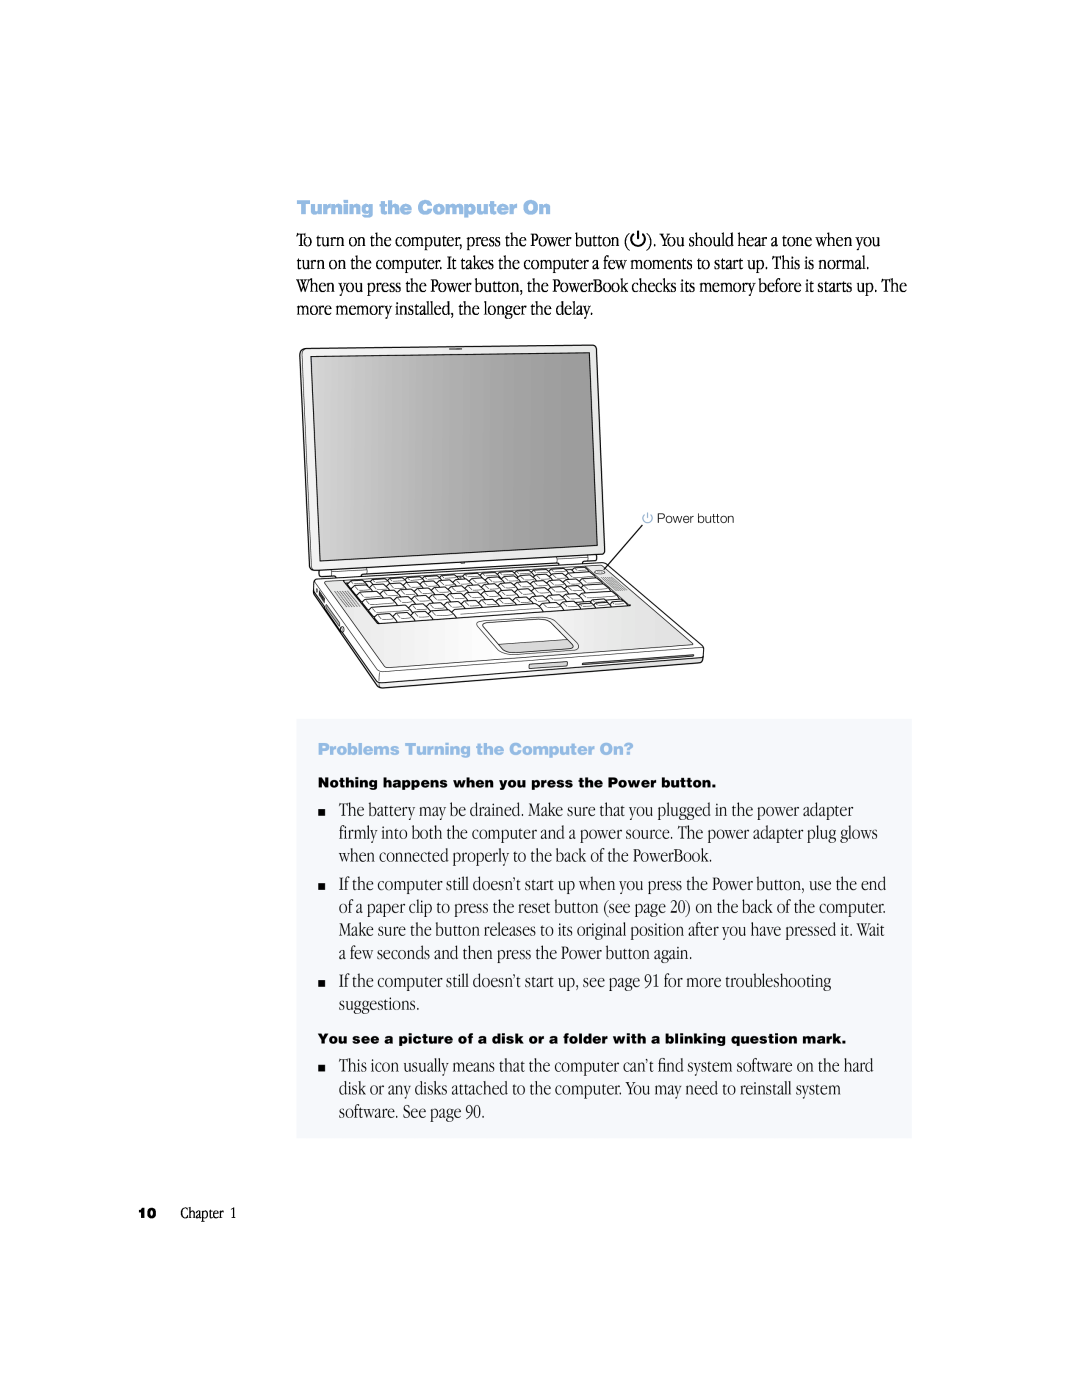 Apple powerbook g4 manual Problems Turning the Computer On? 